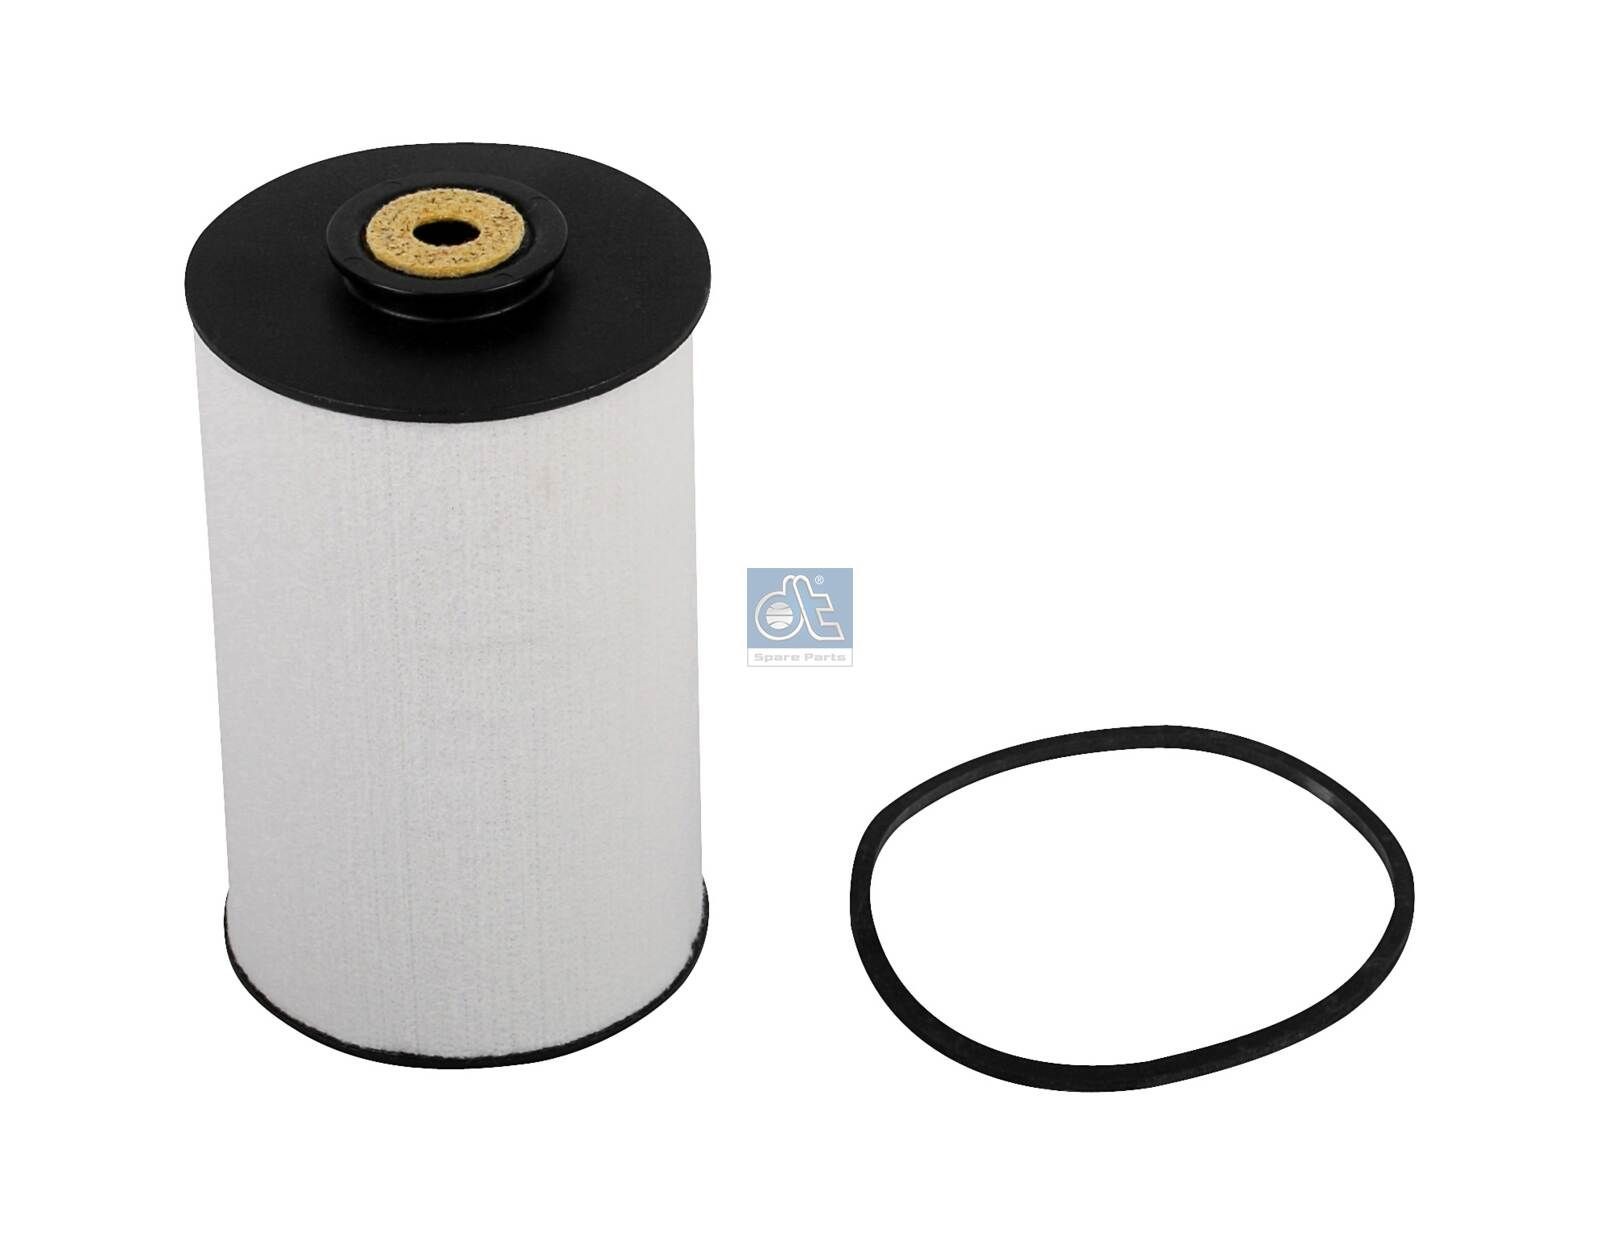 BFU 900 x DT Spare Parts 4.61531 Fuel filter A422 092 0205